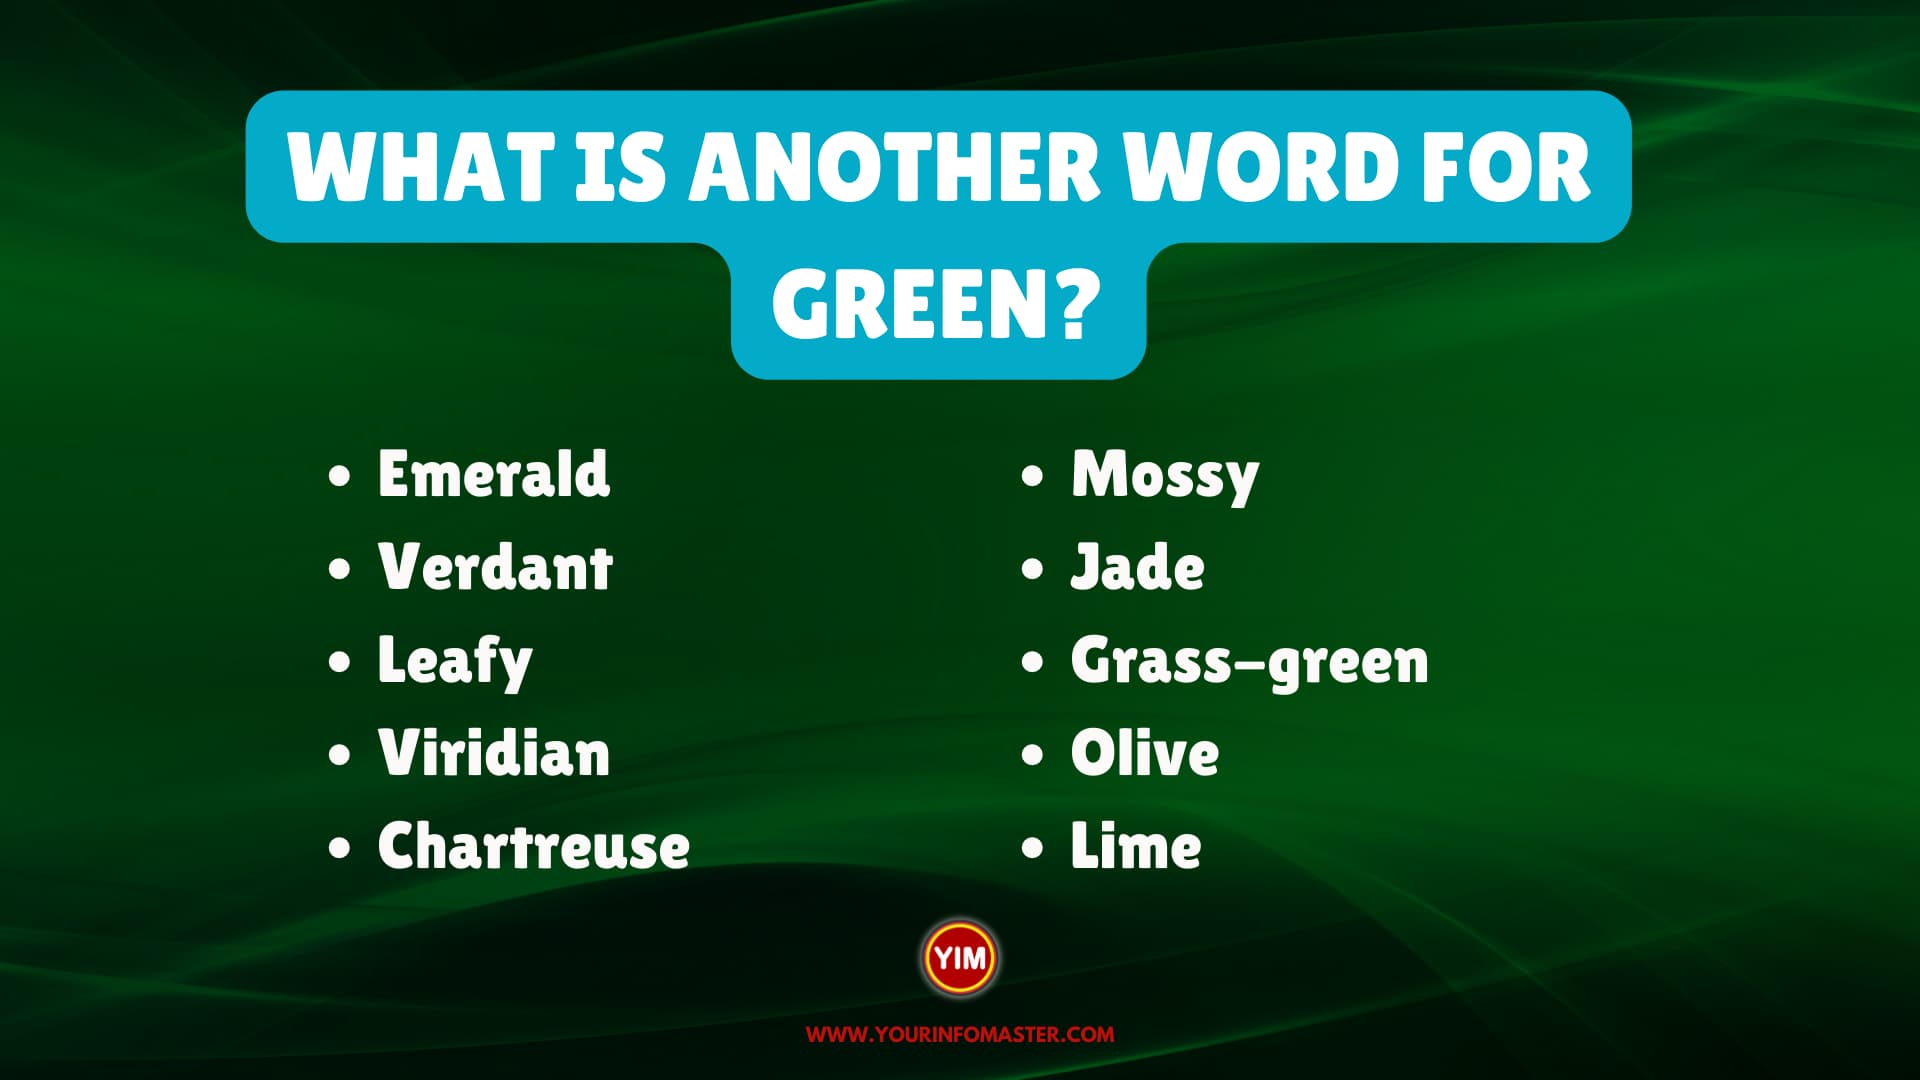 What is another word for Green